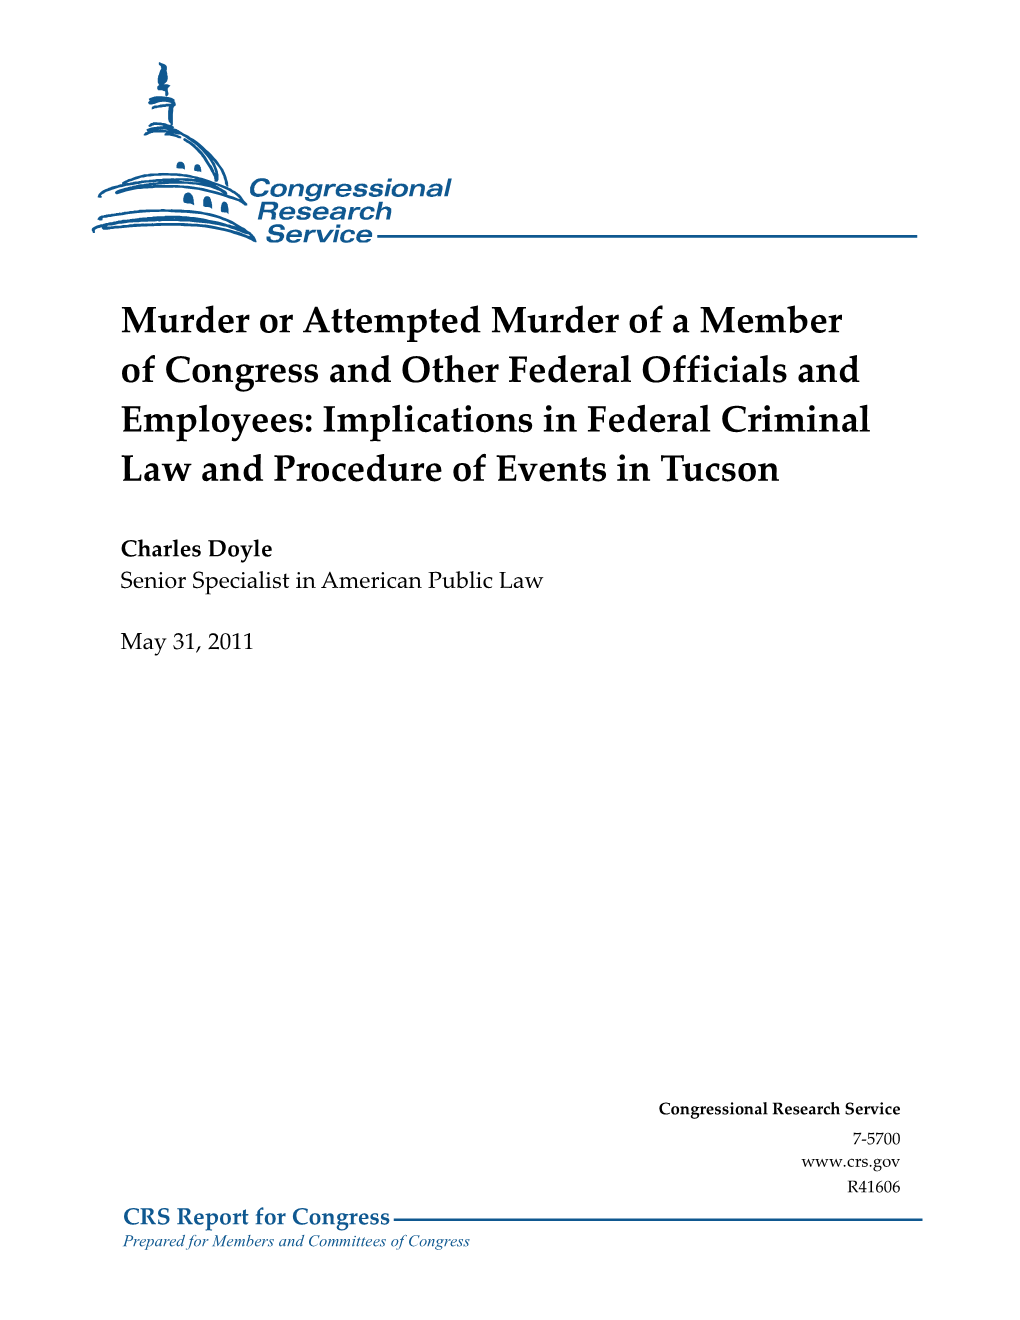 Murder Or Attempted Murder of a Member of Congress and Other Federal Officials and Employees: Implications in Federal Criminal Law and Procedure of Events in Tucson